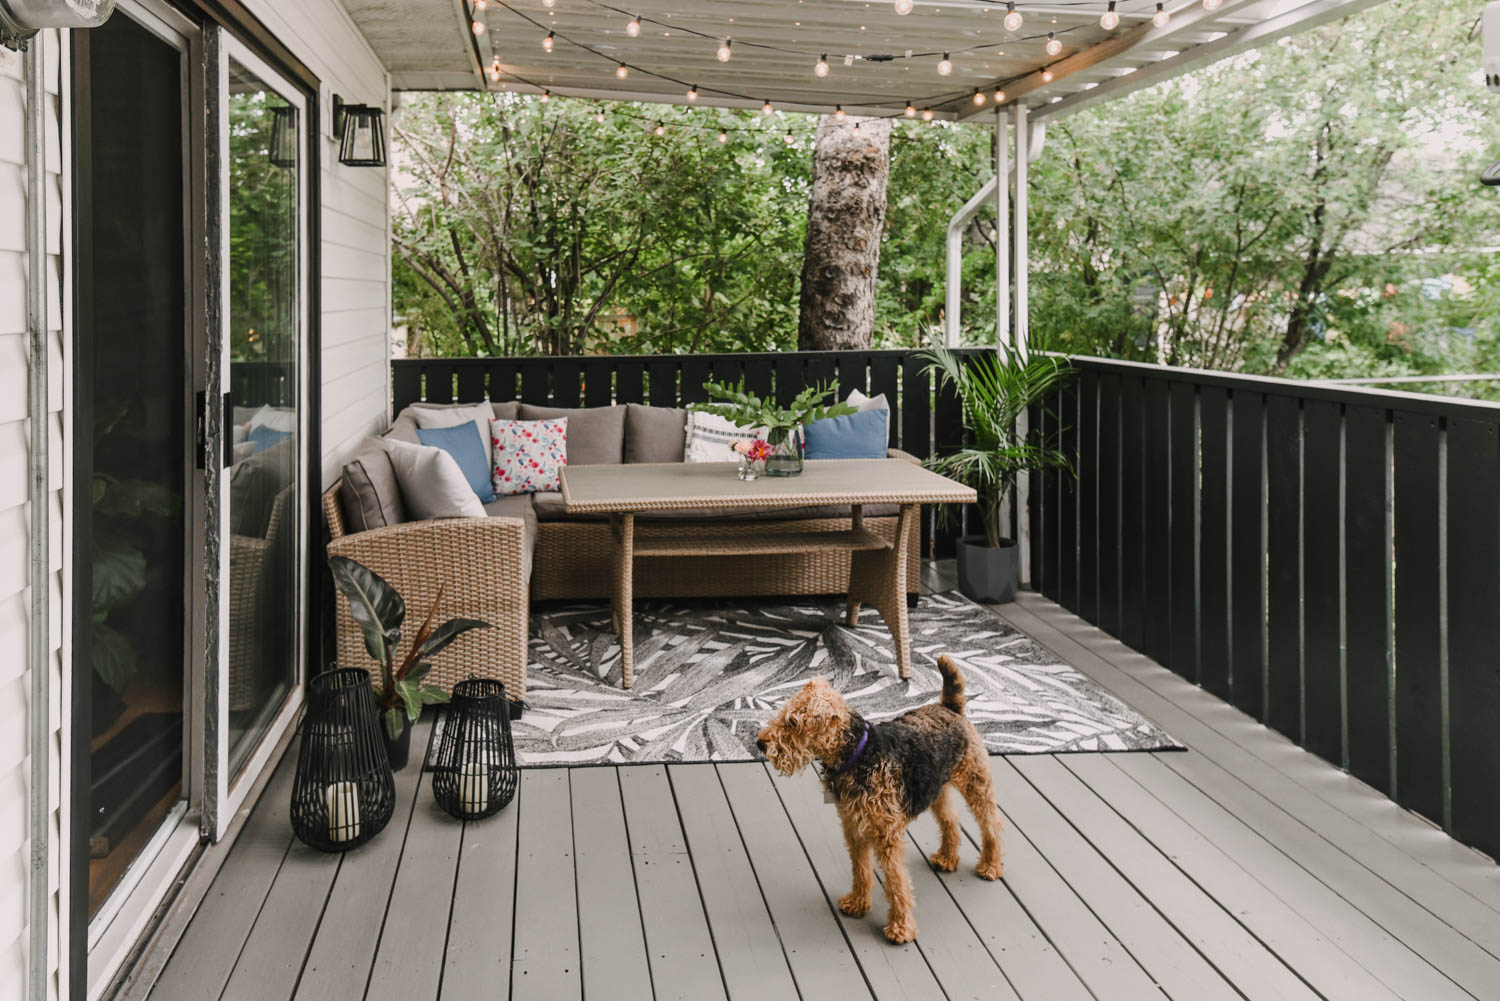 Old wood patio makeover